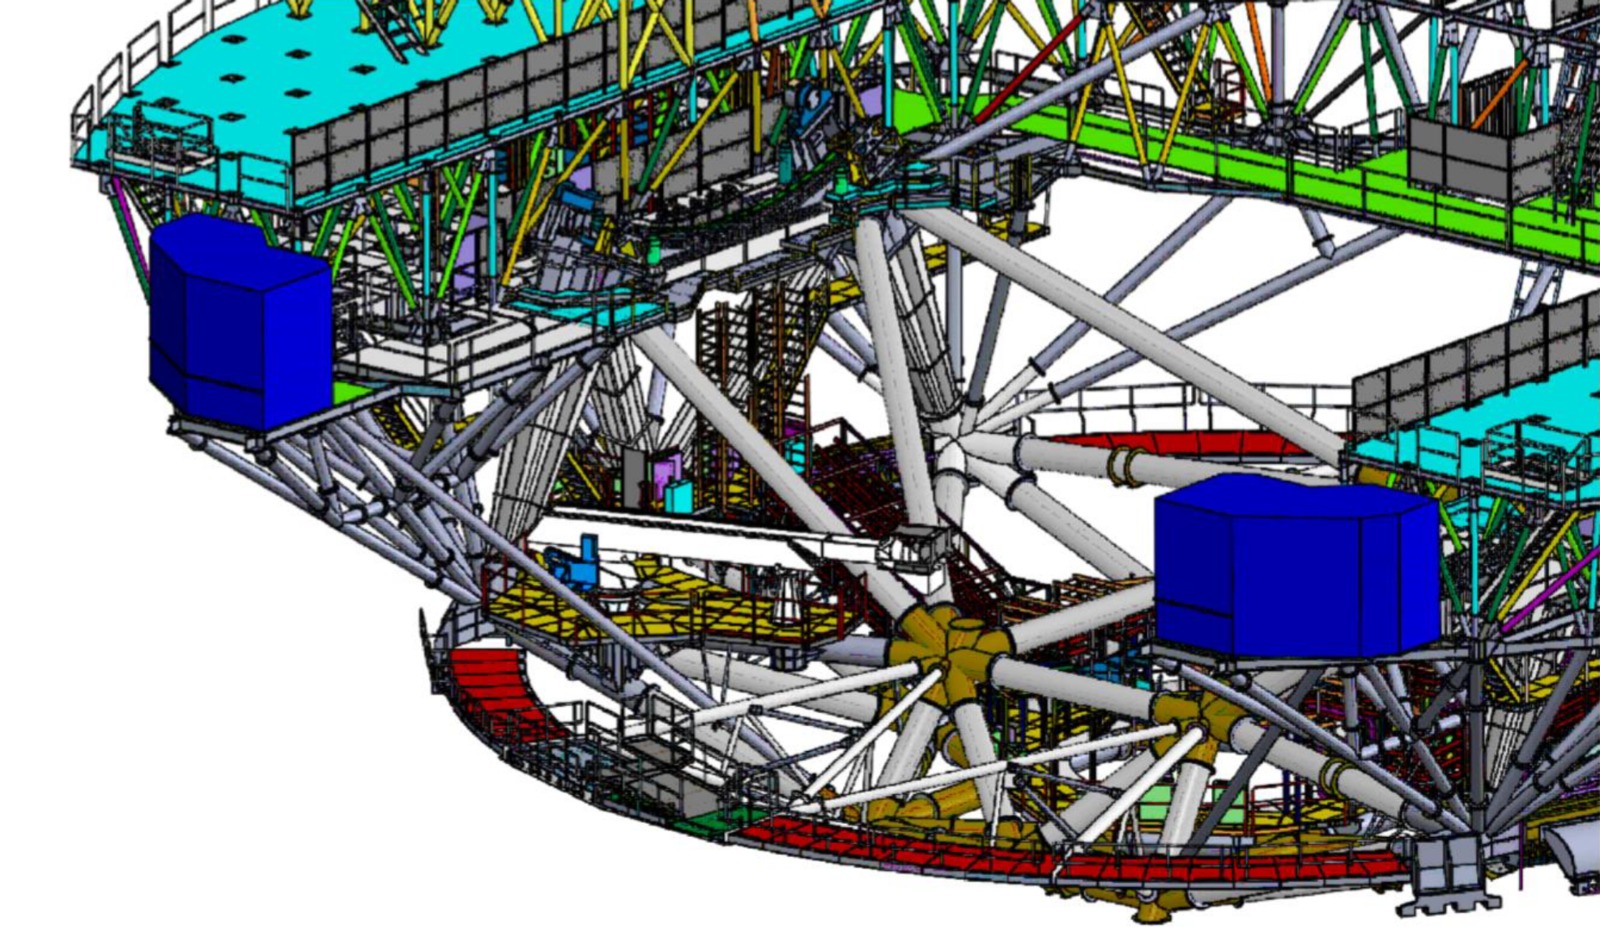 Rendering of TMT’s Cryogenic Cooling System (CRYO) Envelopes on the telescope Nasmyth Platforms structure